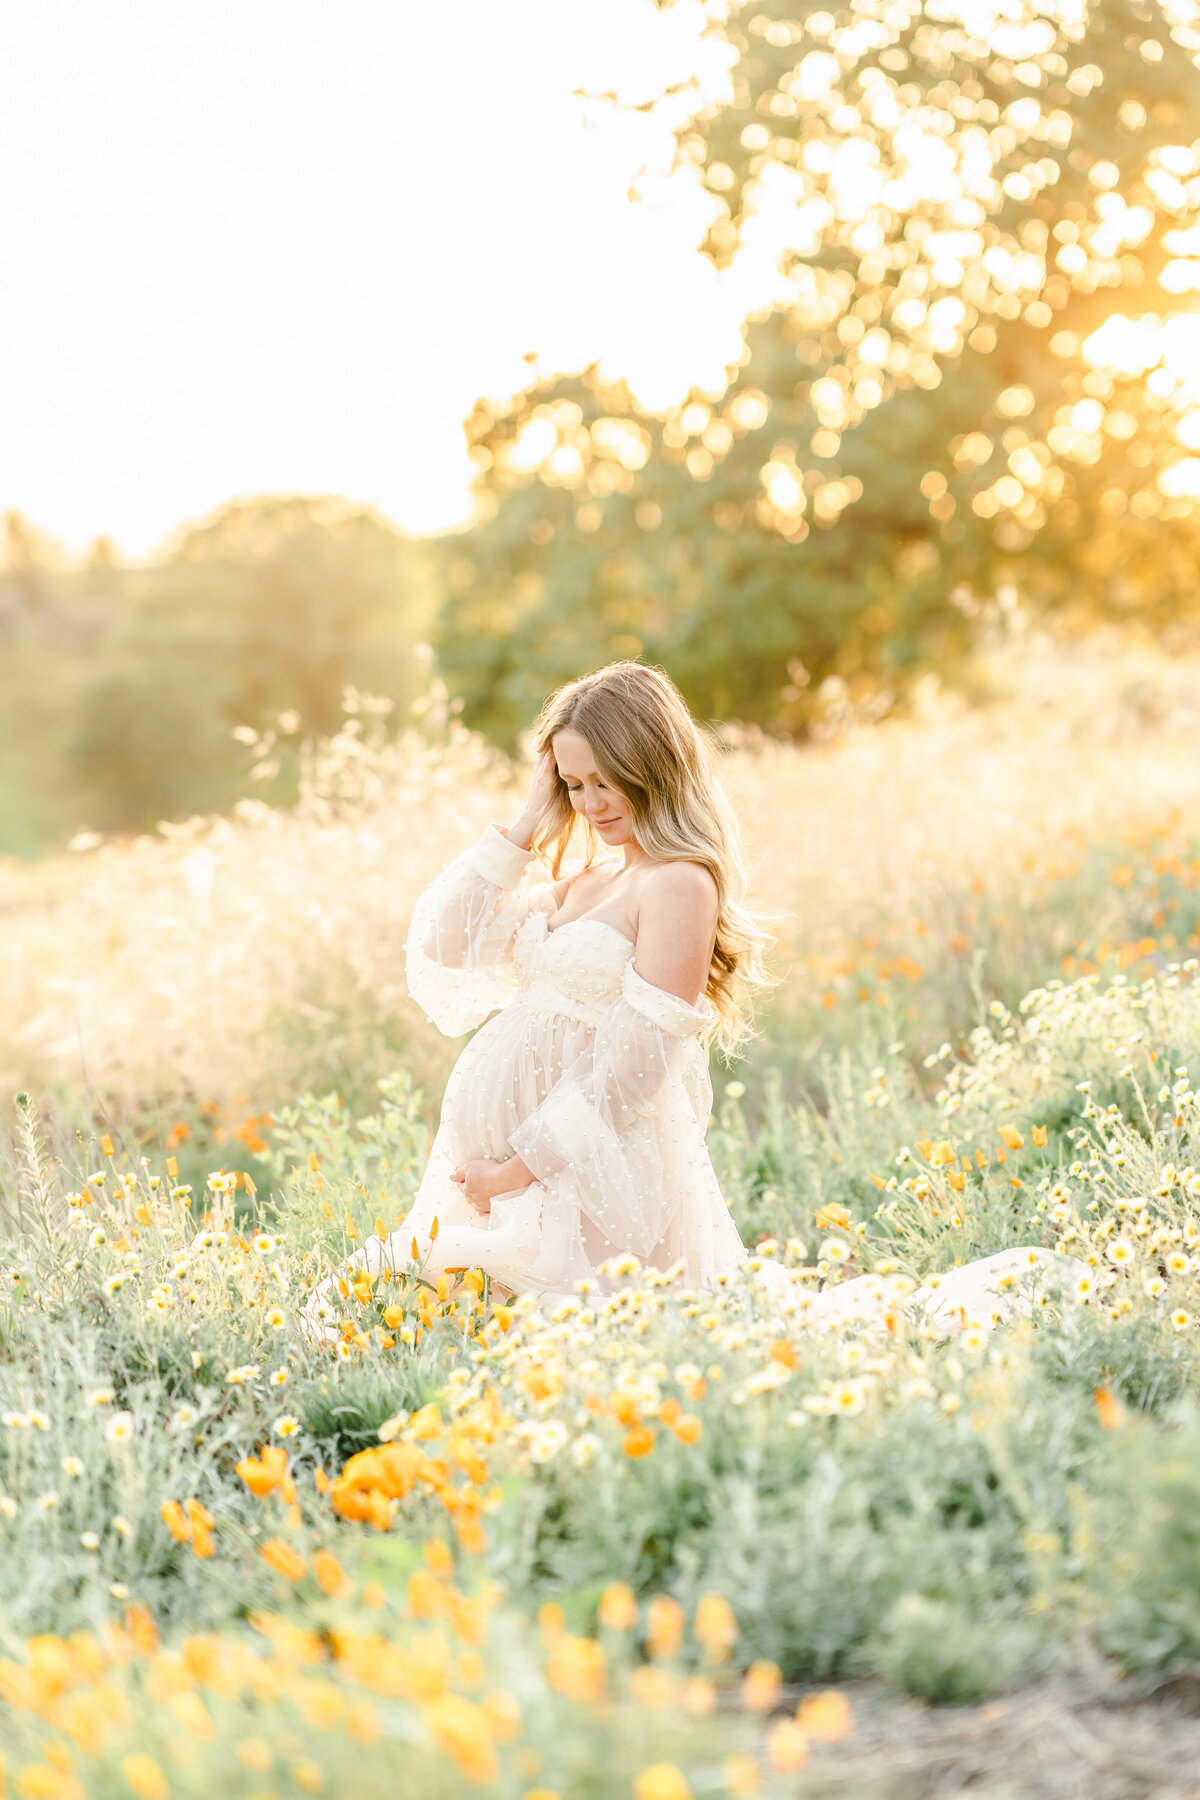 An expecting mother kneels in a field of poppies while caressing her beautiful baby bump photographed by Bay area photographer, Light Livin Photography..